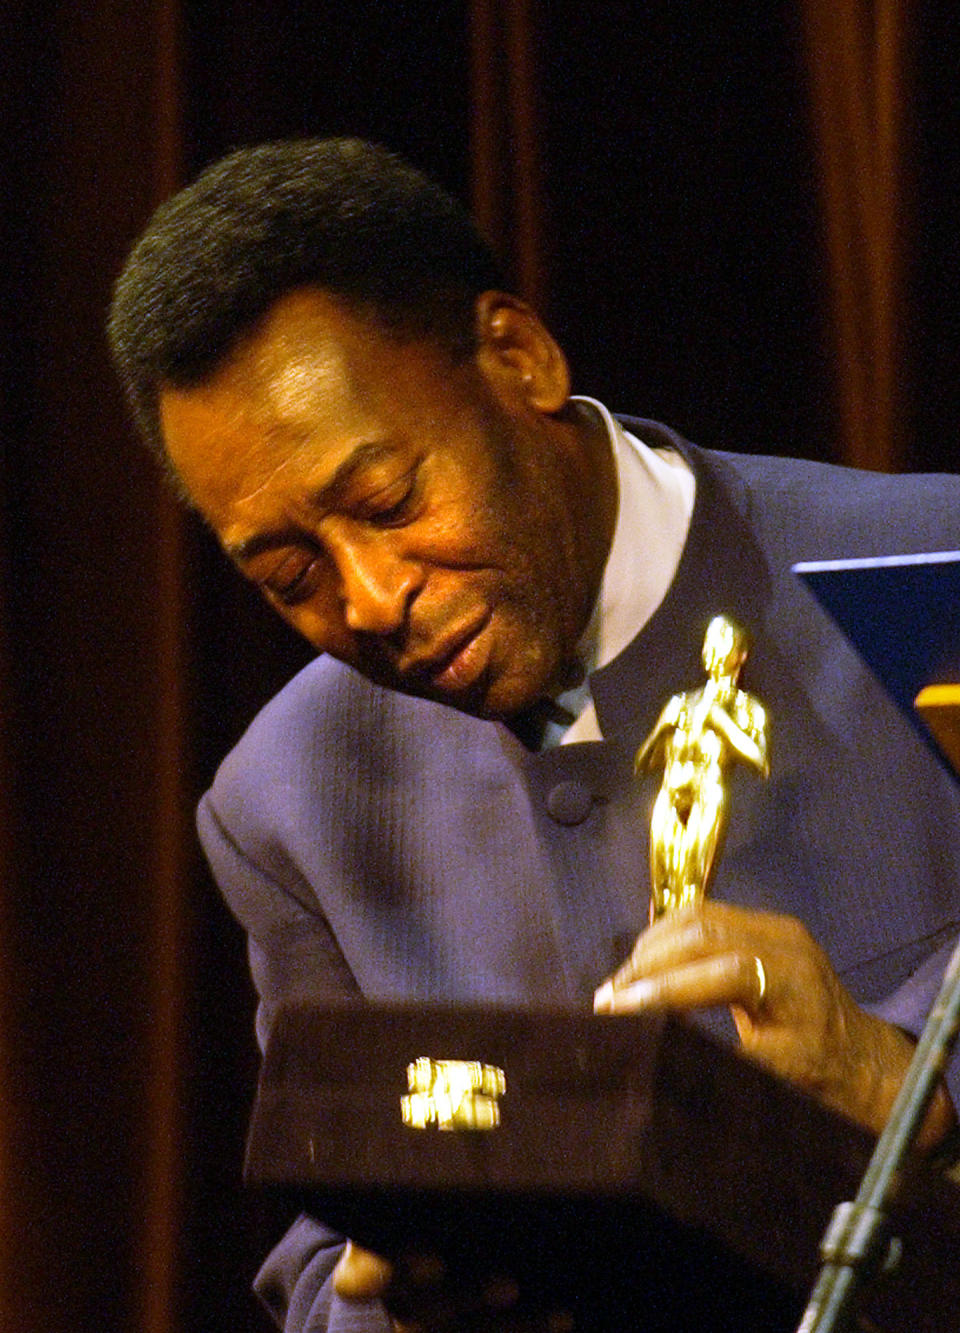 FILE - Brazilian soccer legend Pelé looks at a statue given by the Rio de Janeiro Gov. Rosinha Matheus, at the Municipal Theater in Rio de Janeiro, Monday, June 21, 2004. The recognition was given during the premier of the movie "Pelé Eterno." Pelé, who won a record three World Cups and became one of the most commanding sports figures of the last century, died in Sao Paulo on Thursday, Dec. 29, 2022. He was 82. (AP Photo/Victor R. Caivano, File)